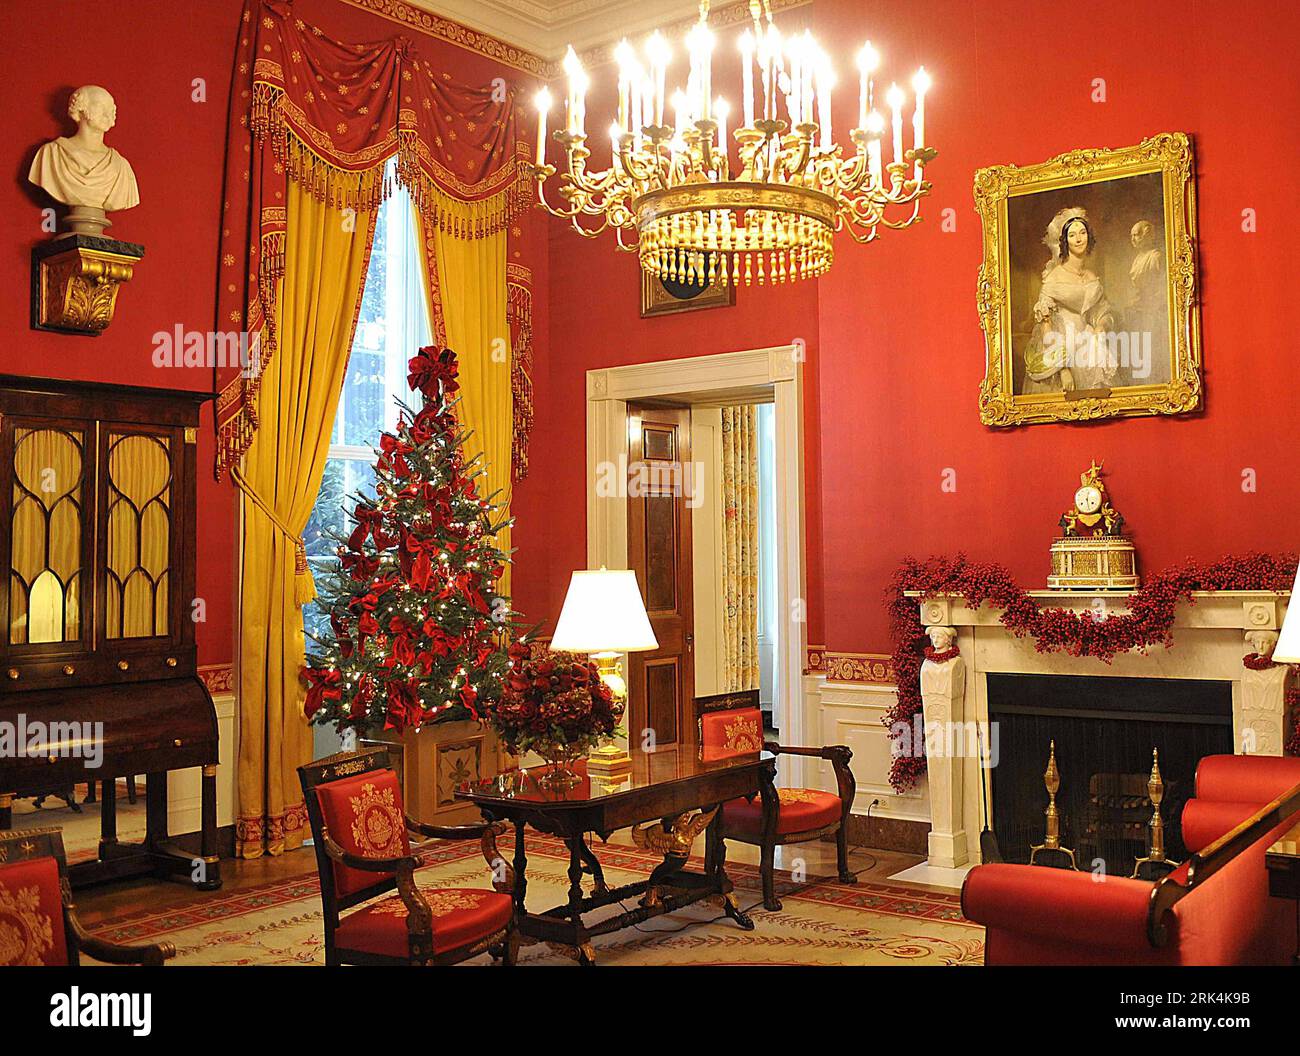 Bildnummer: 53640076  Datum: 02.12.2009  Copyright: imago/Xinhua (091202) -- WASHINGTON, Dec. 2, 2009 (Xinhua) -- The Red Room of the White House is decorated with cranberry garland, cranberry wreaths and the Fraser Fir Christmas tree in the White House in Washington Dec. 2, 2009. White House offered a preview of holiday decorations to the press on Wednesday. (Xinhua/Zhang Yan) (4)US-WHITE HOUSE-HOLIDAY DECORATIONS PUBLICATIONxNOTxINxCHN Weihnachten Weißes Haus kbdig xsp 2009 quer premiumd o0 Deko, Weihnachtsdeko o00 Gebäude innen Innenansicht    Bildnummer 53640076 Date 02 12 2009 Copyright I Stock Photo